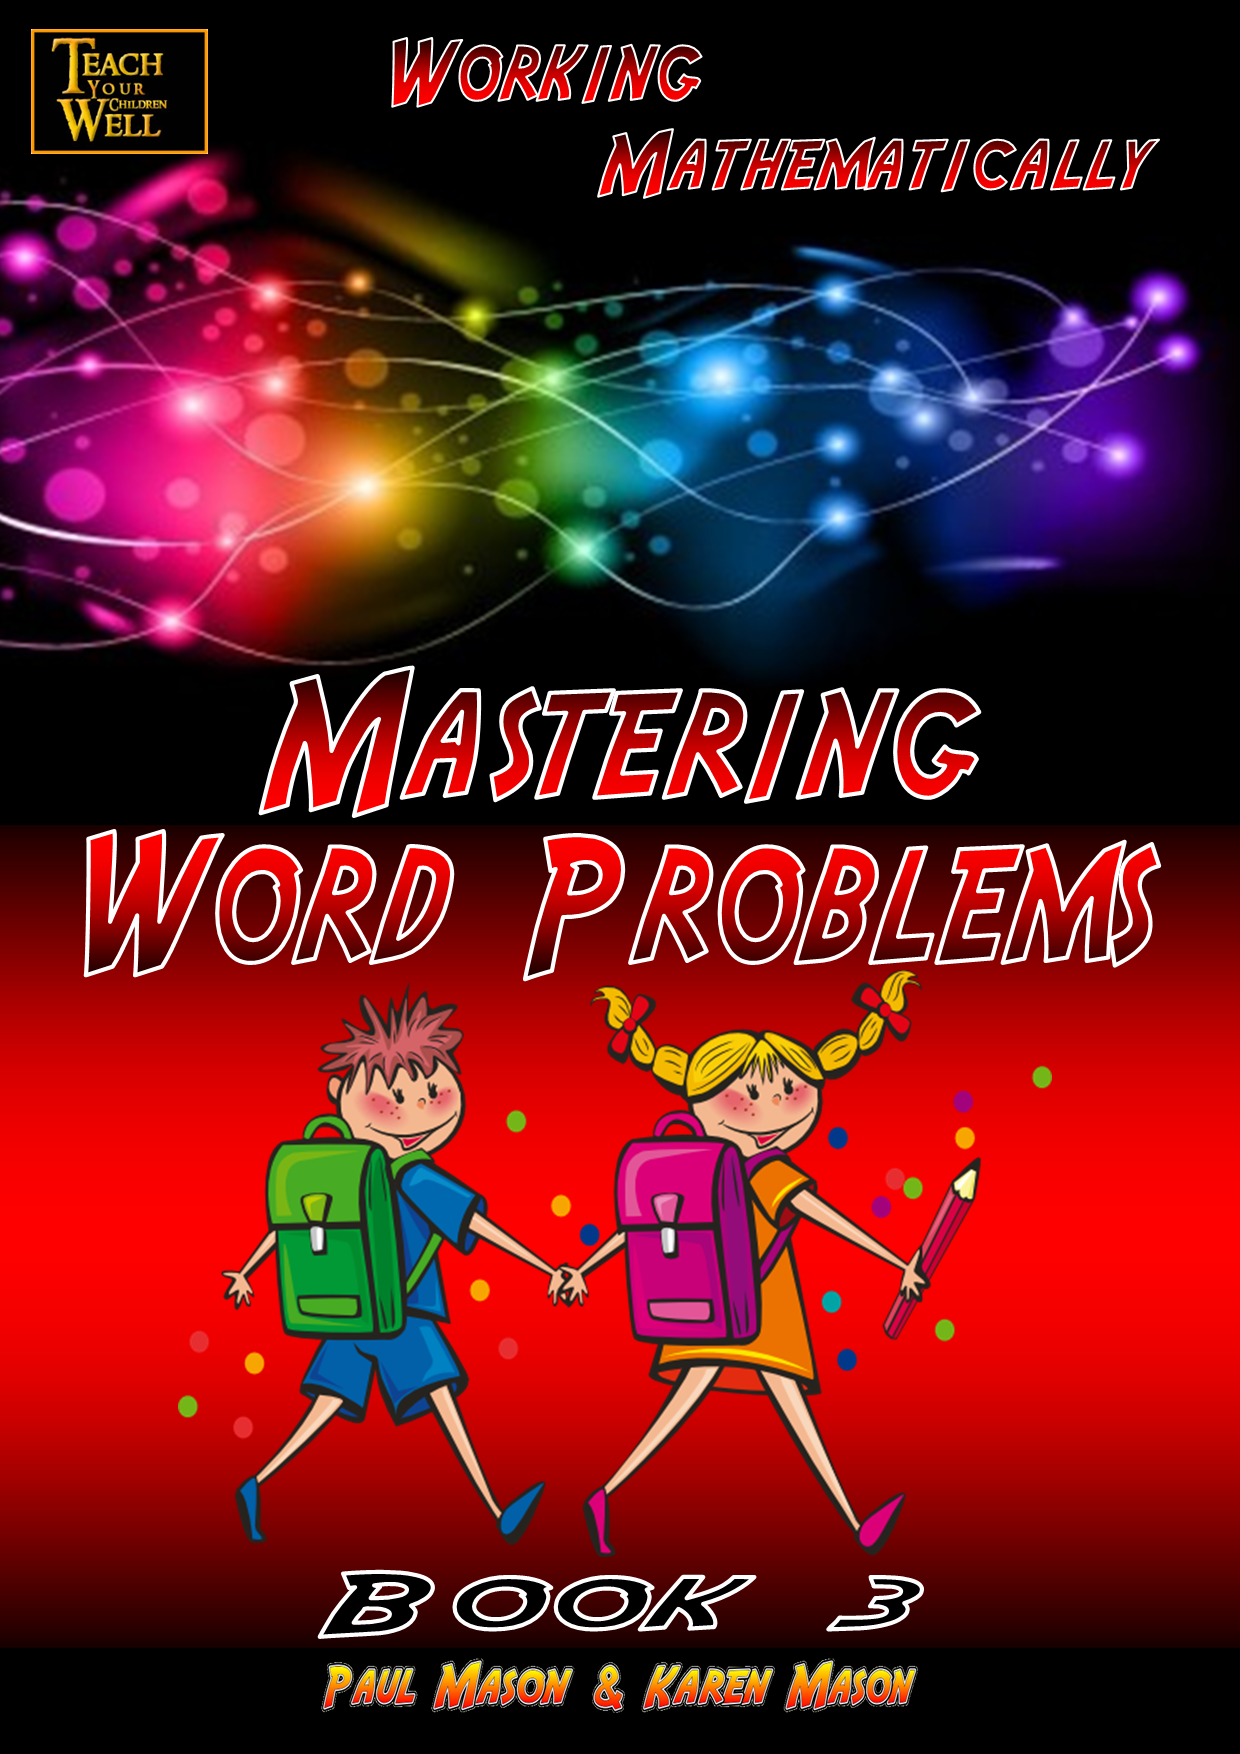 MASTERING WORD PROBLEMS 3 - 260 Word Problems